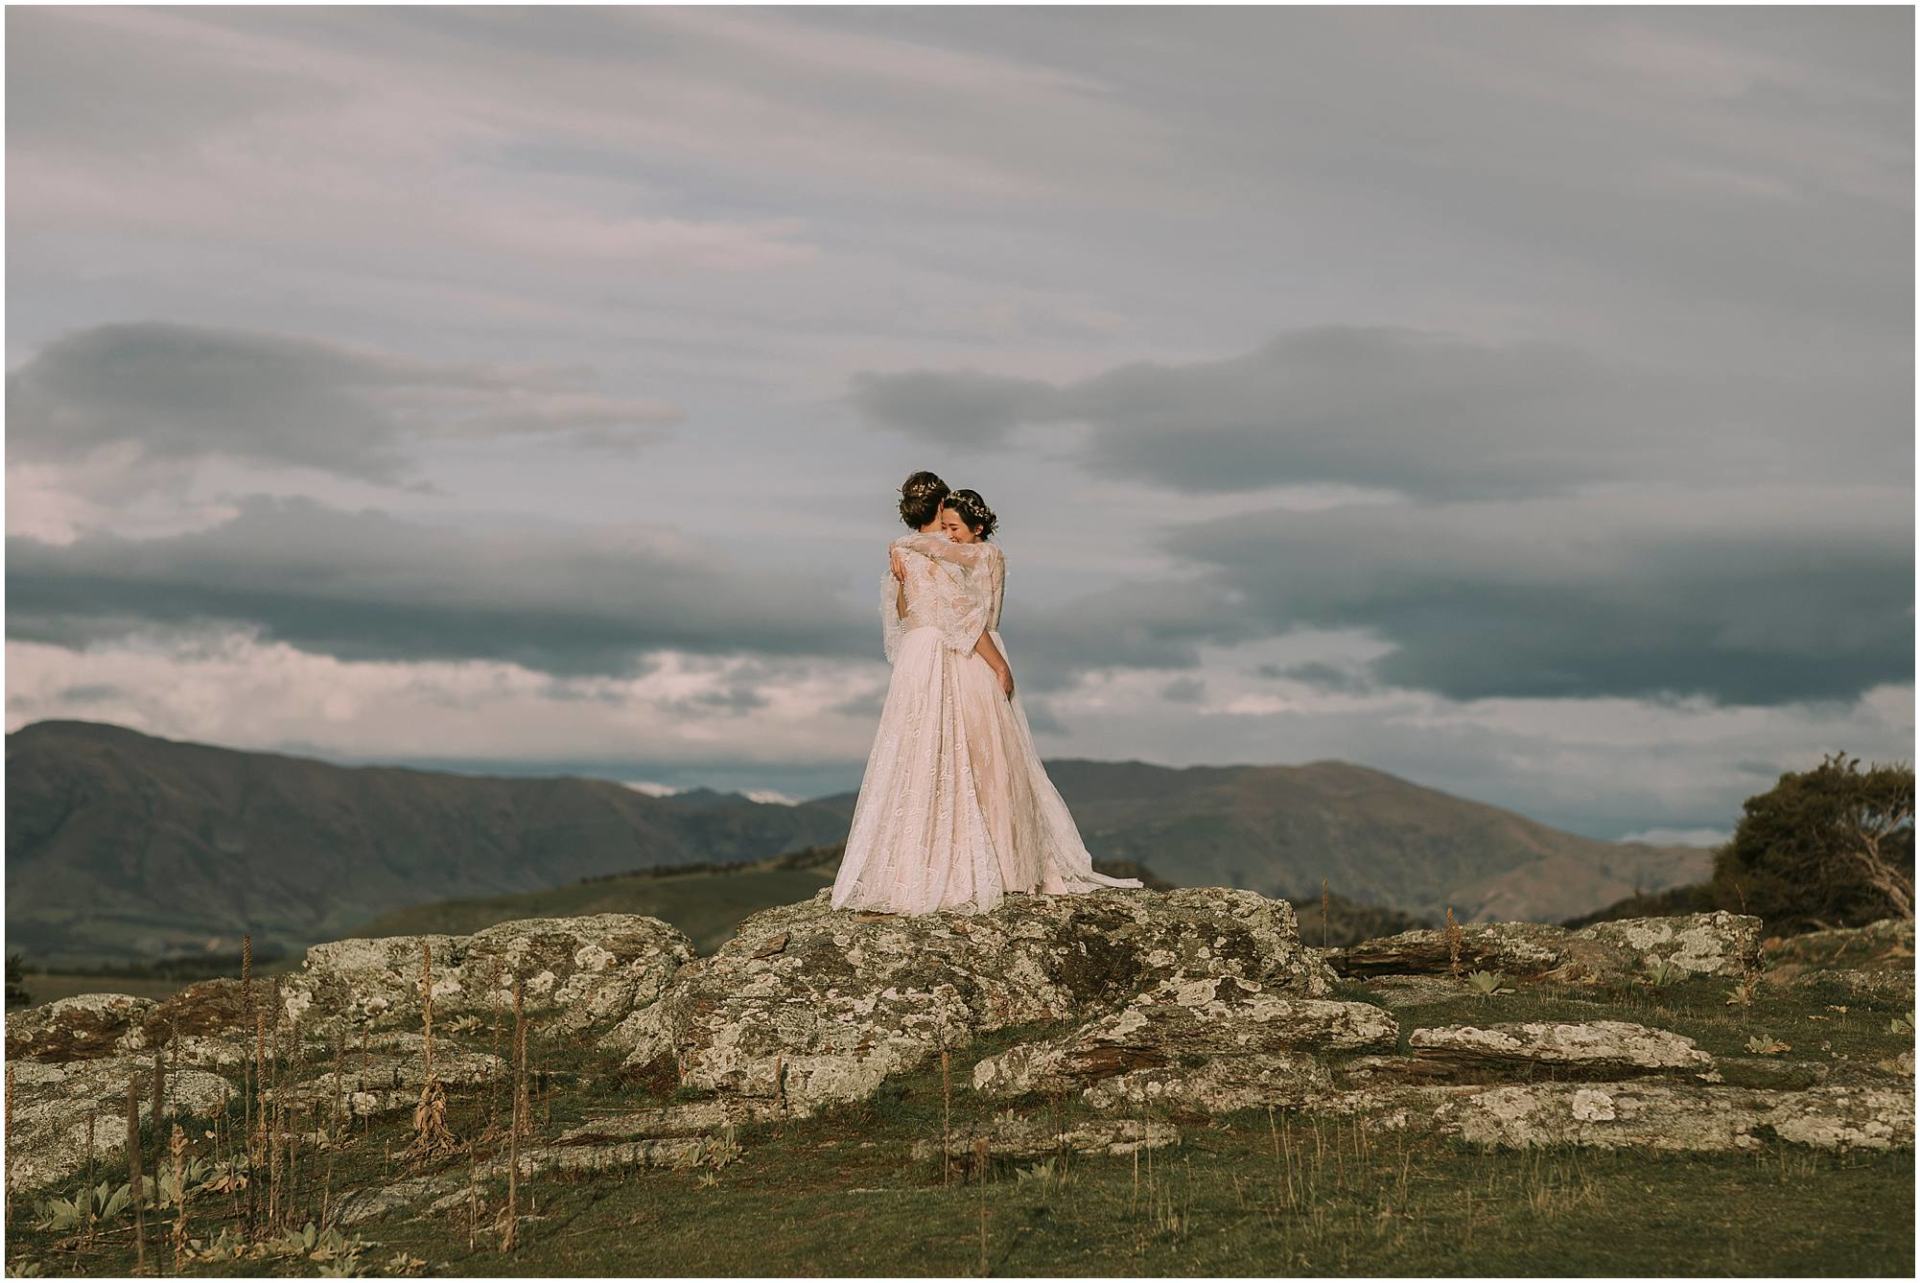 Charlotte Kiri Photography - Wedding Photography of two beautiful brides embracing on top of rocks with landscape and stormy clouds behind them